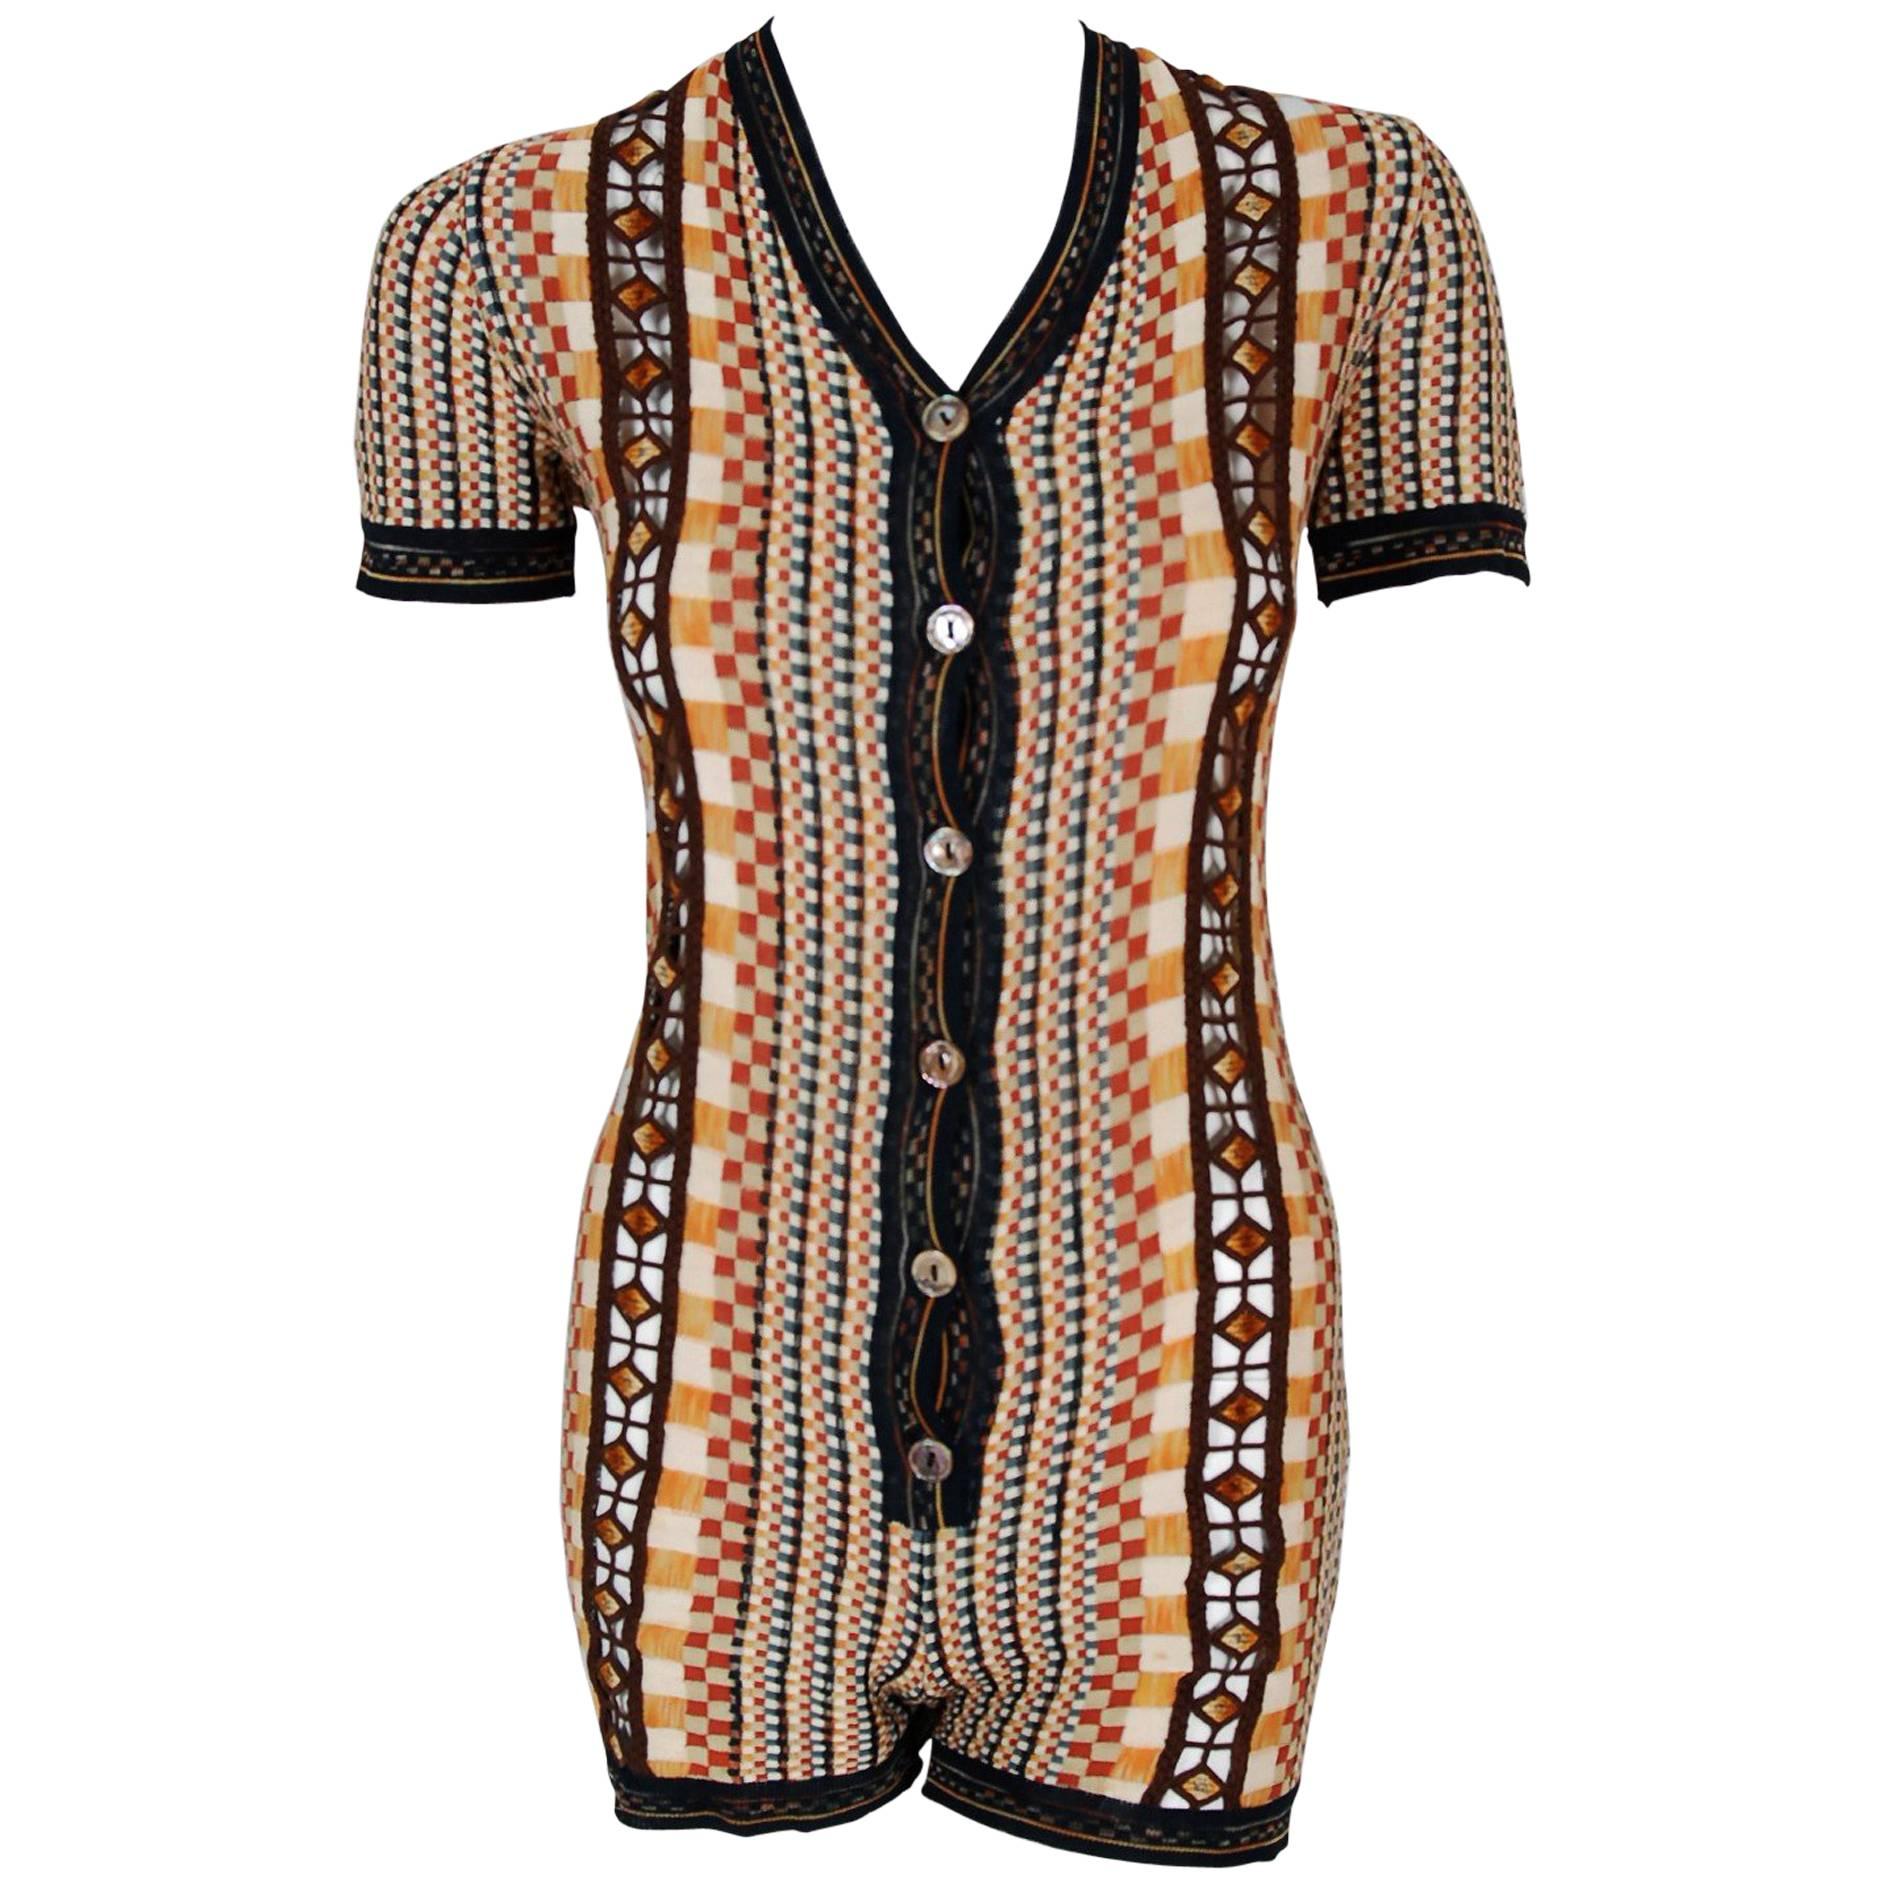 1990's Jean Paul Gaultier Graphic Silk Knit Cut-Out Hourglass Playsuit Romper